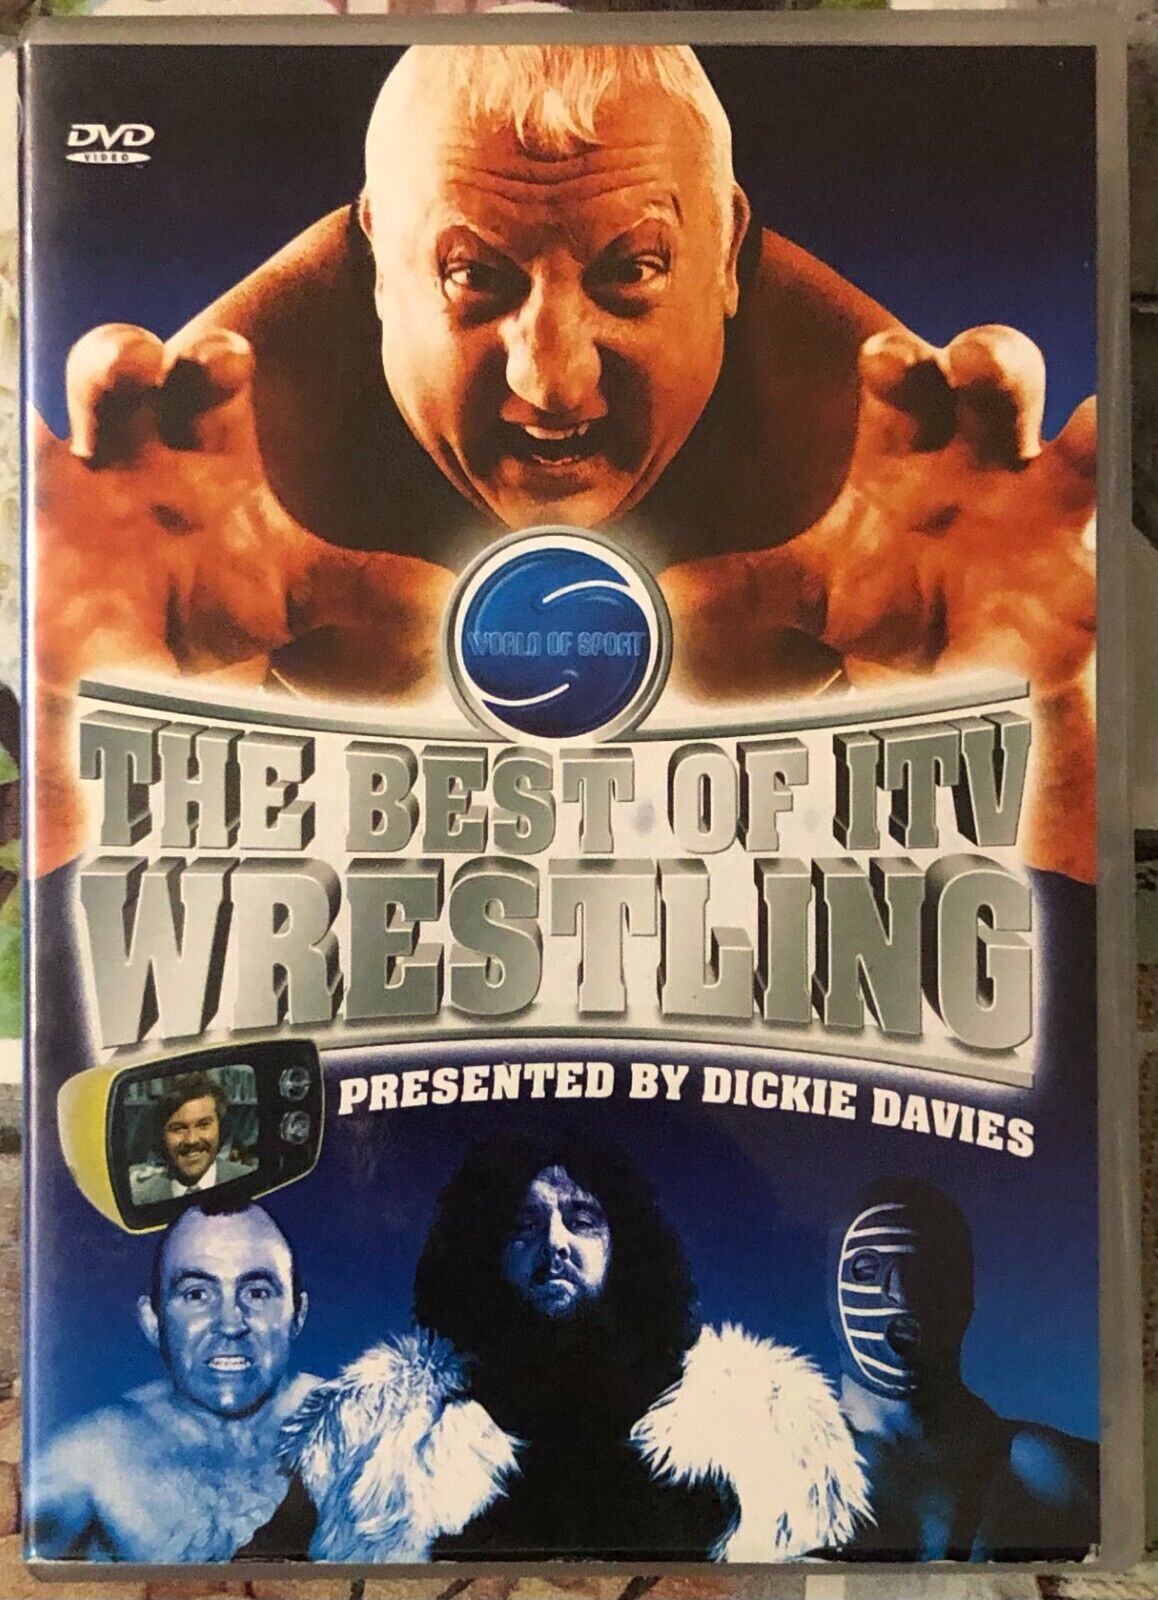  The Best Of ITV Wrestling presented by Dickie Davies DVD di World Of Sport, 2